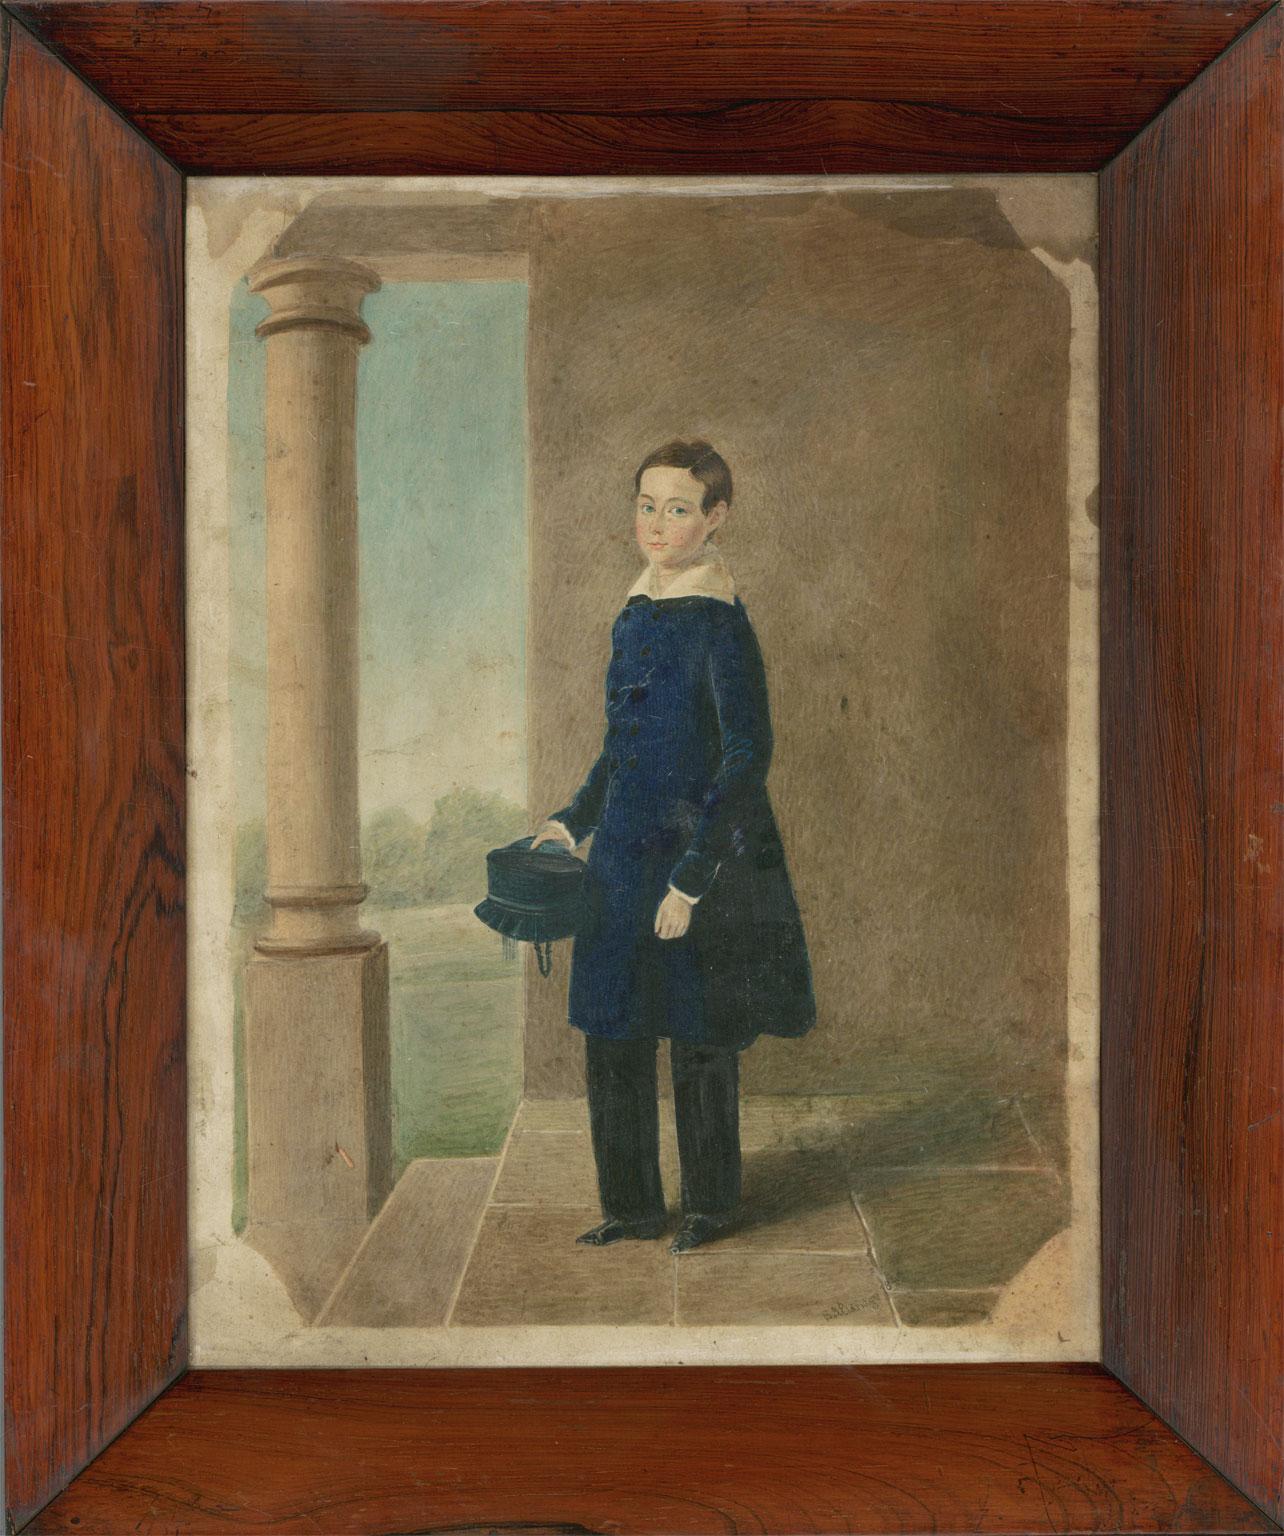 A very fine pair of early 19th Century watercolour portraits by the artist E.J. Eldridge, depicting both a portrait of a lady in a black dress with white lace accoutrements in an interior, and a young boy in his school uniform, depicted in a